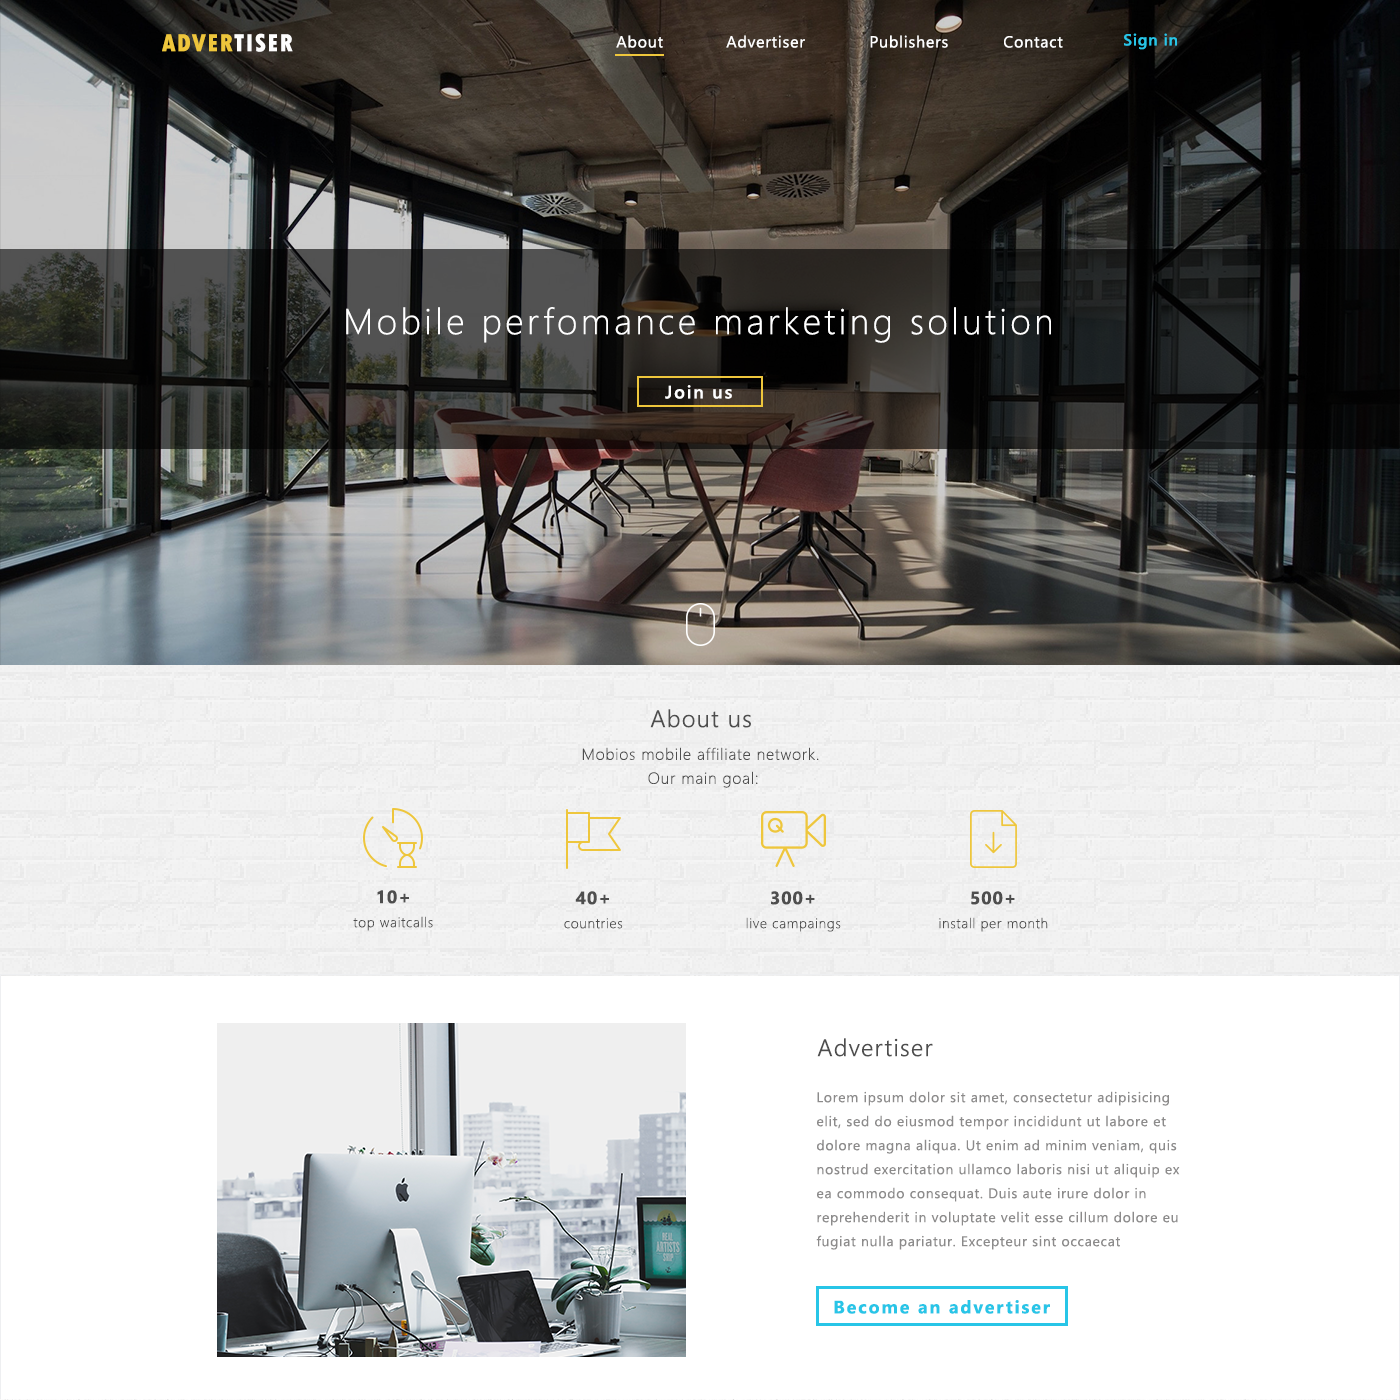 Web design landing page for company Advertiser